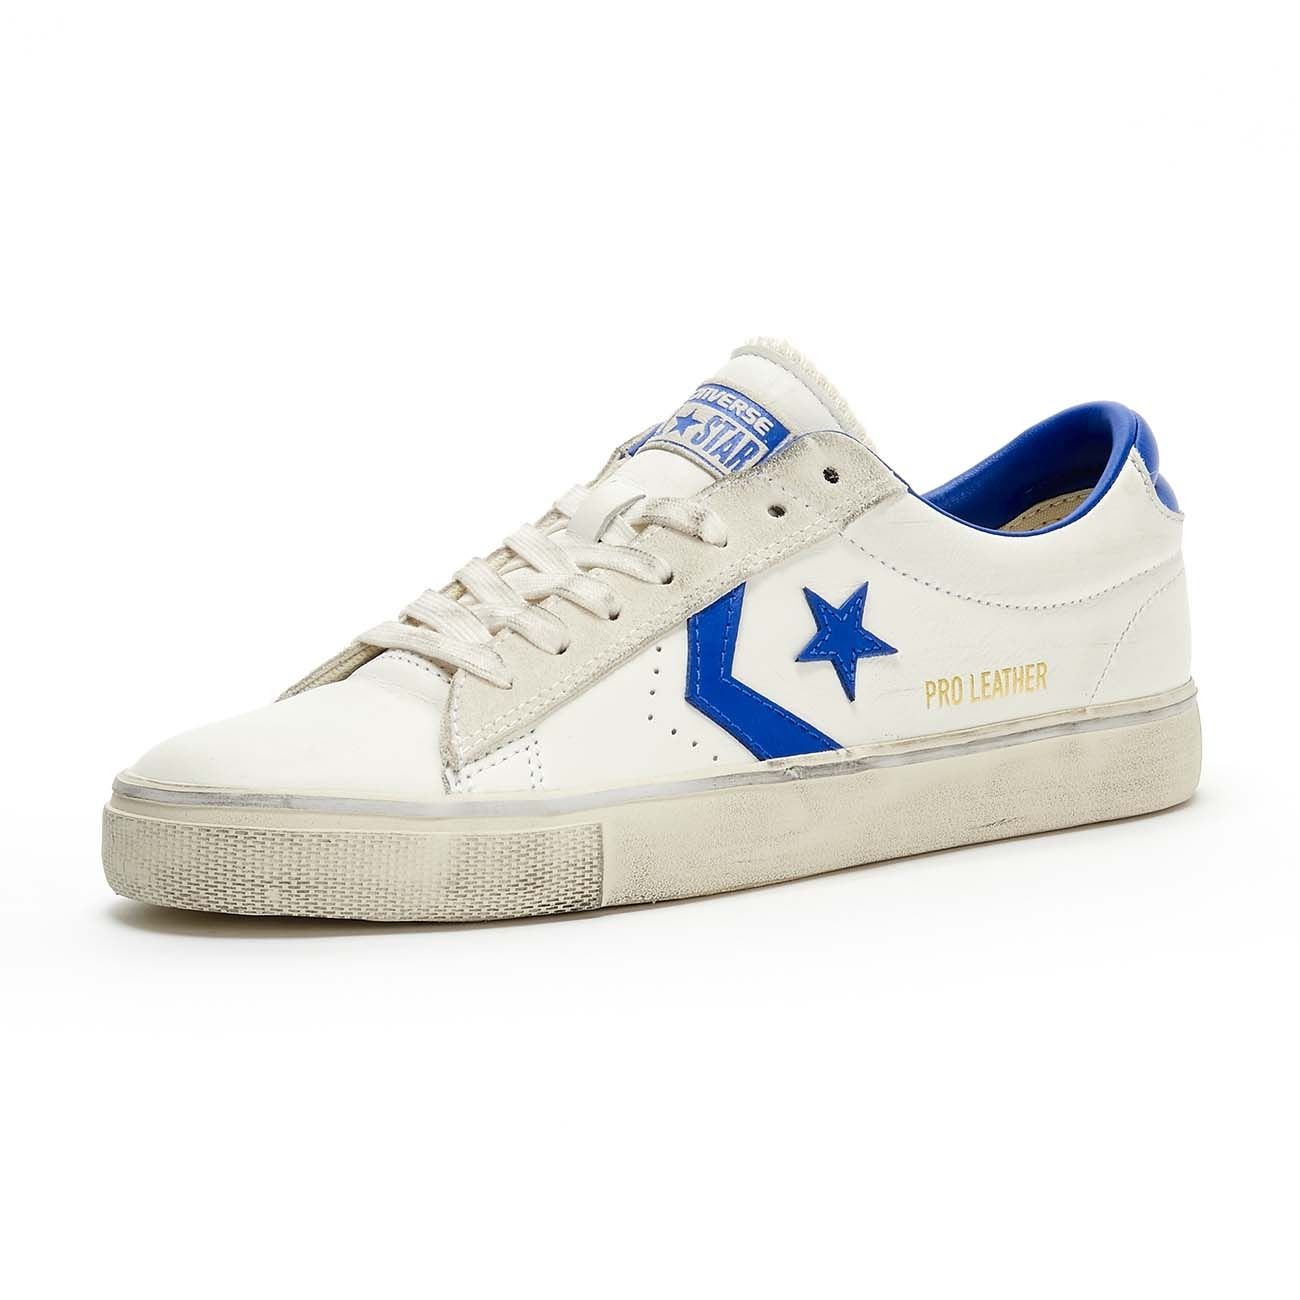 CONVERSE SNEAKERS PRO LEATHER VULC DISTRESSED OX Men White hyper ... تودز